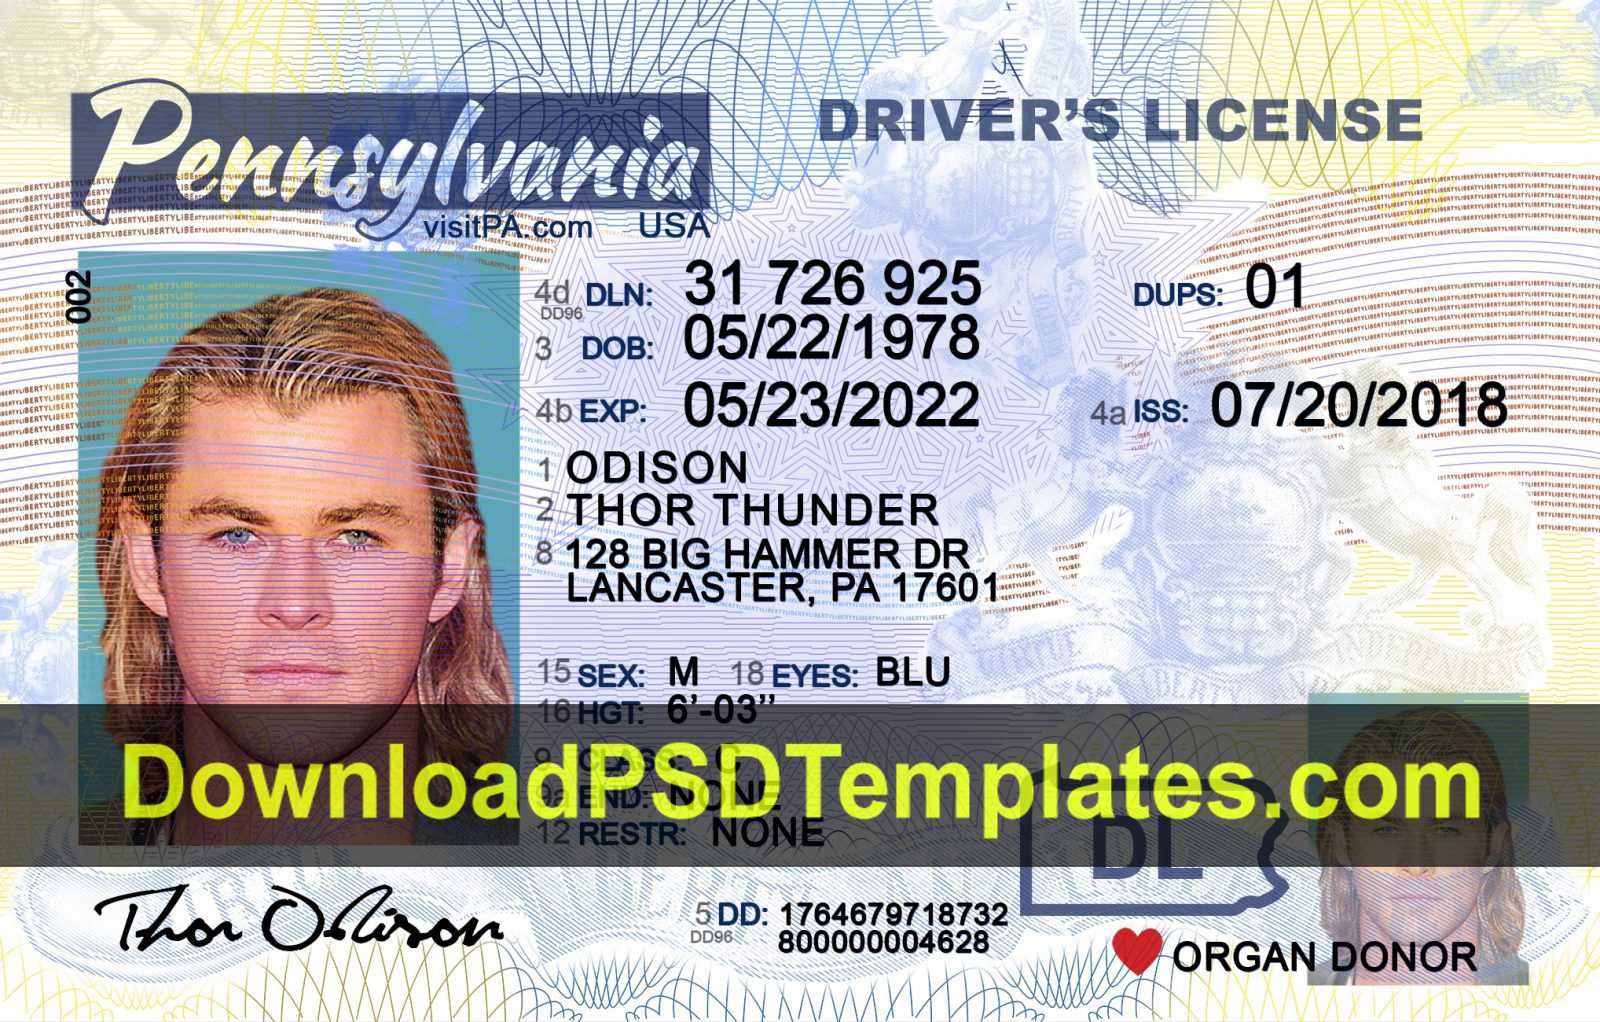 Pennsylvania Driver License Template Psd [New Pa Dl] With Blank Drivers License Template